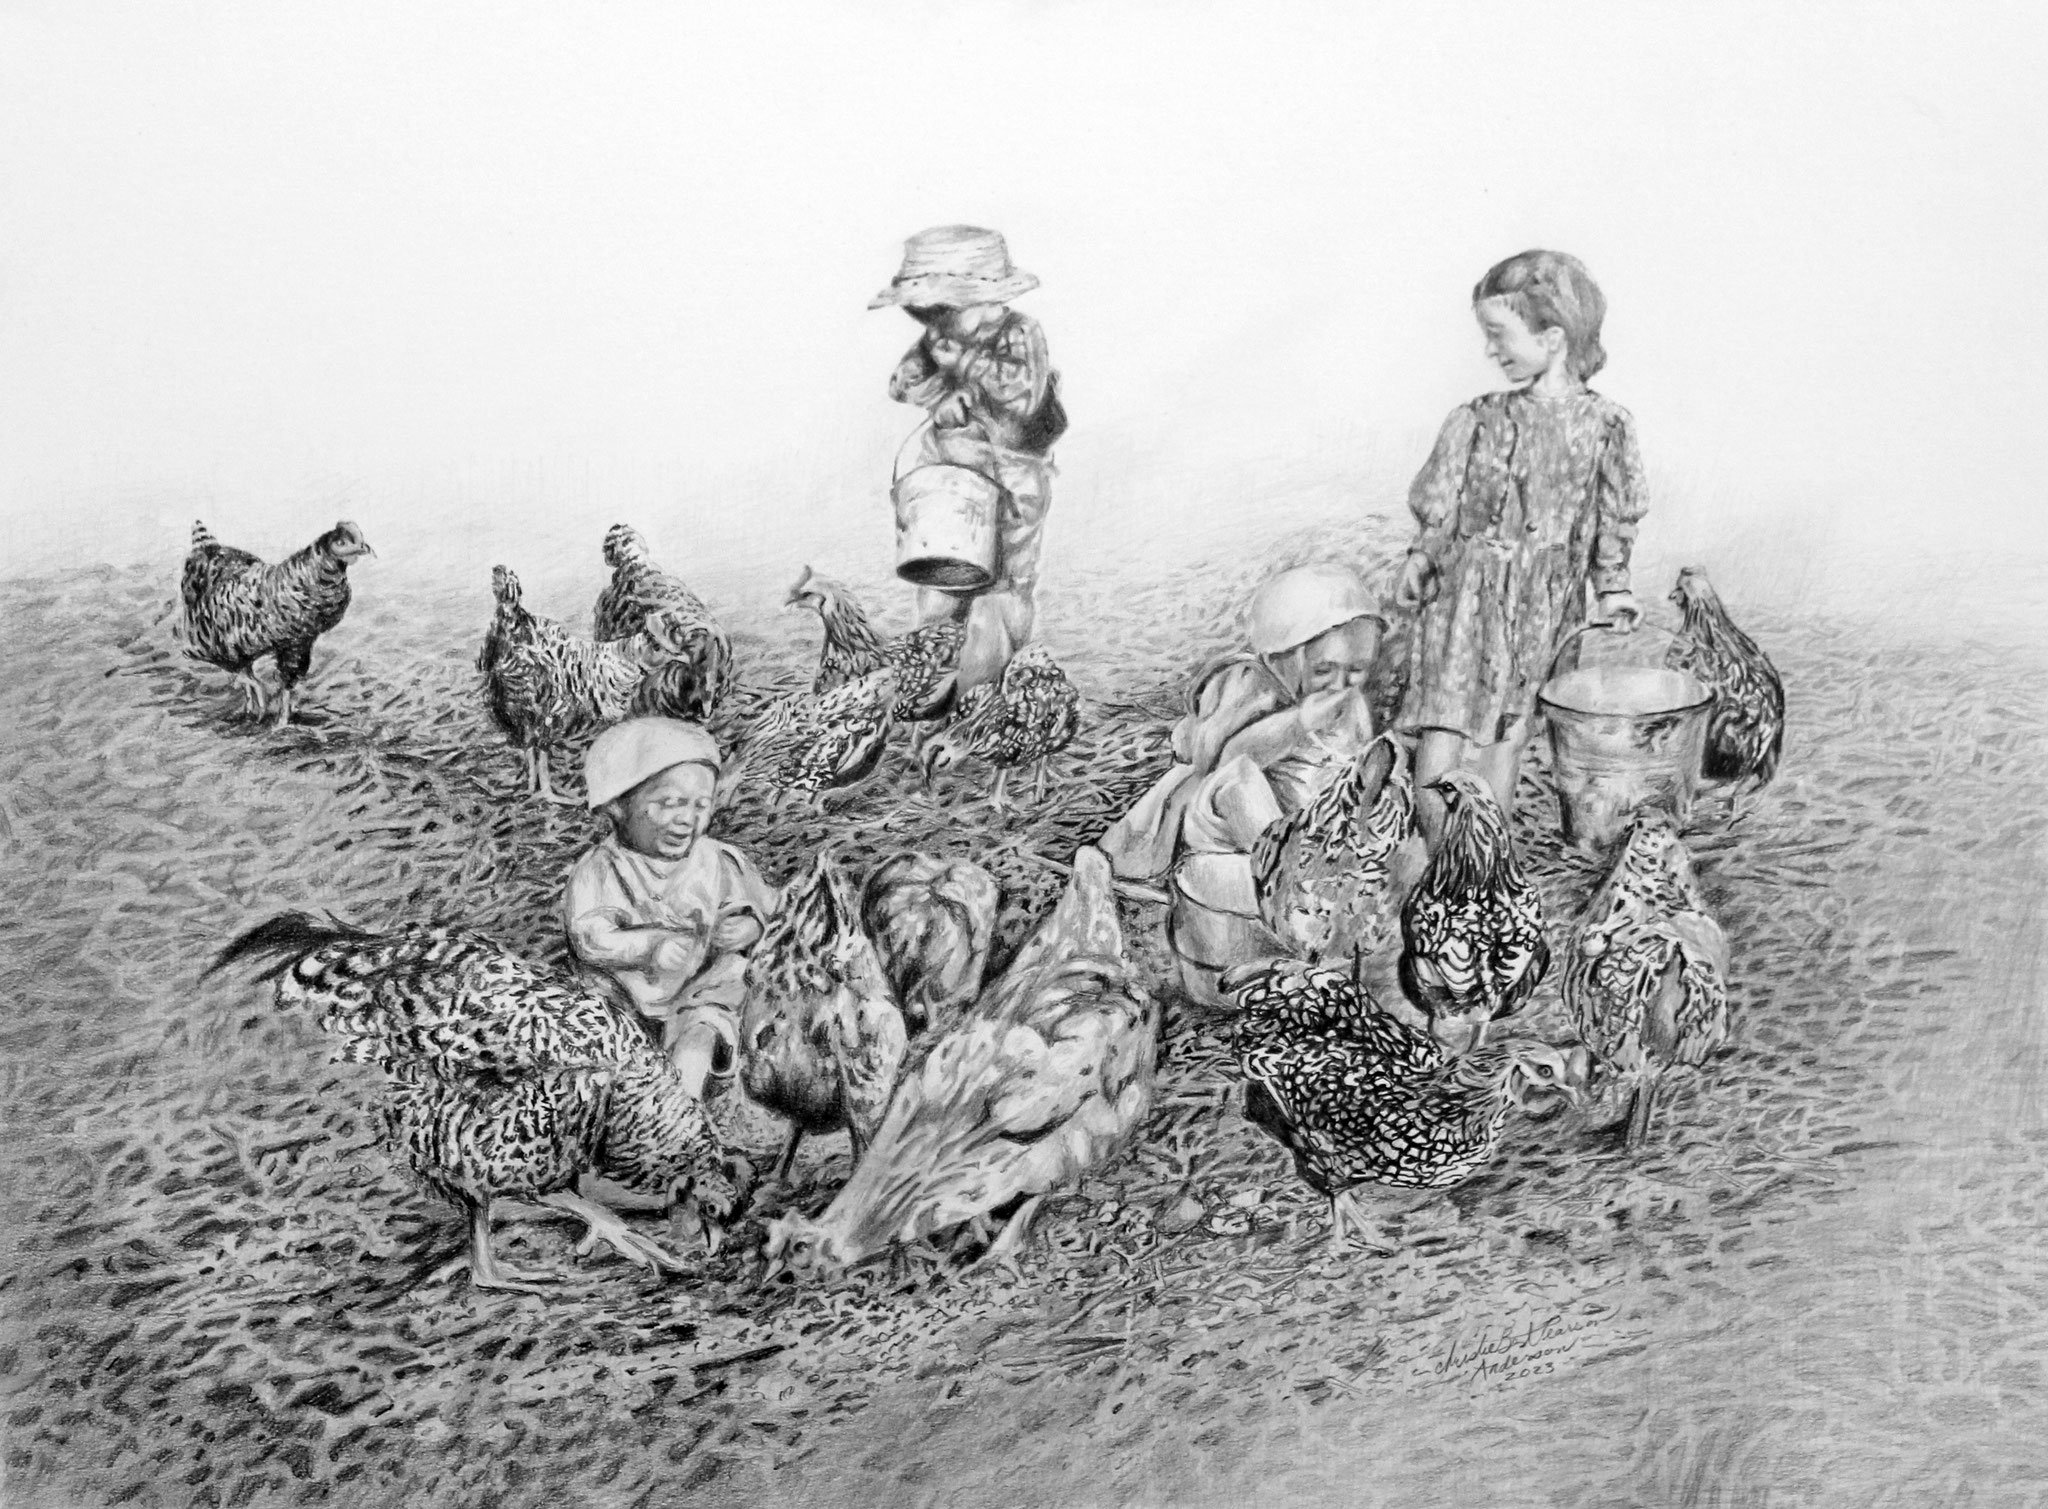 FEEDING THE CHICKENS 16 x 20 graphite drawing 